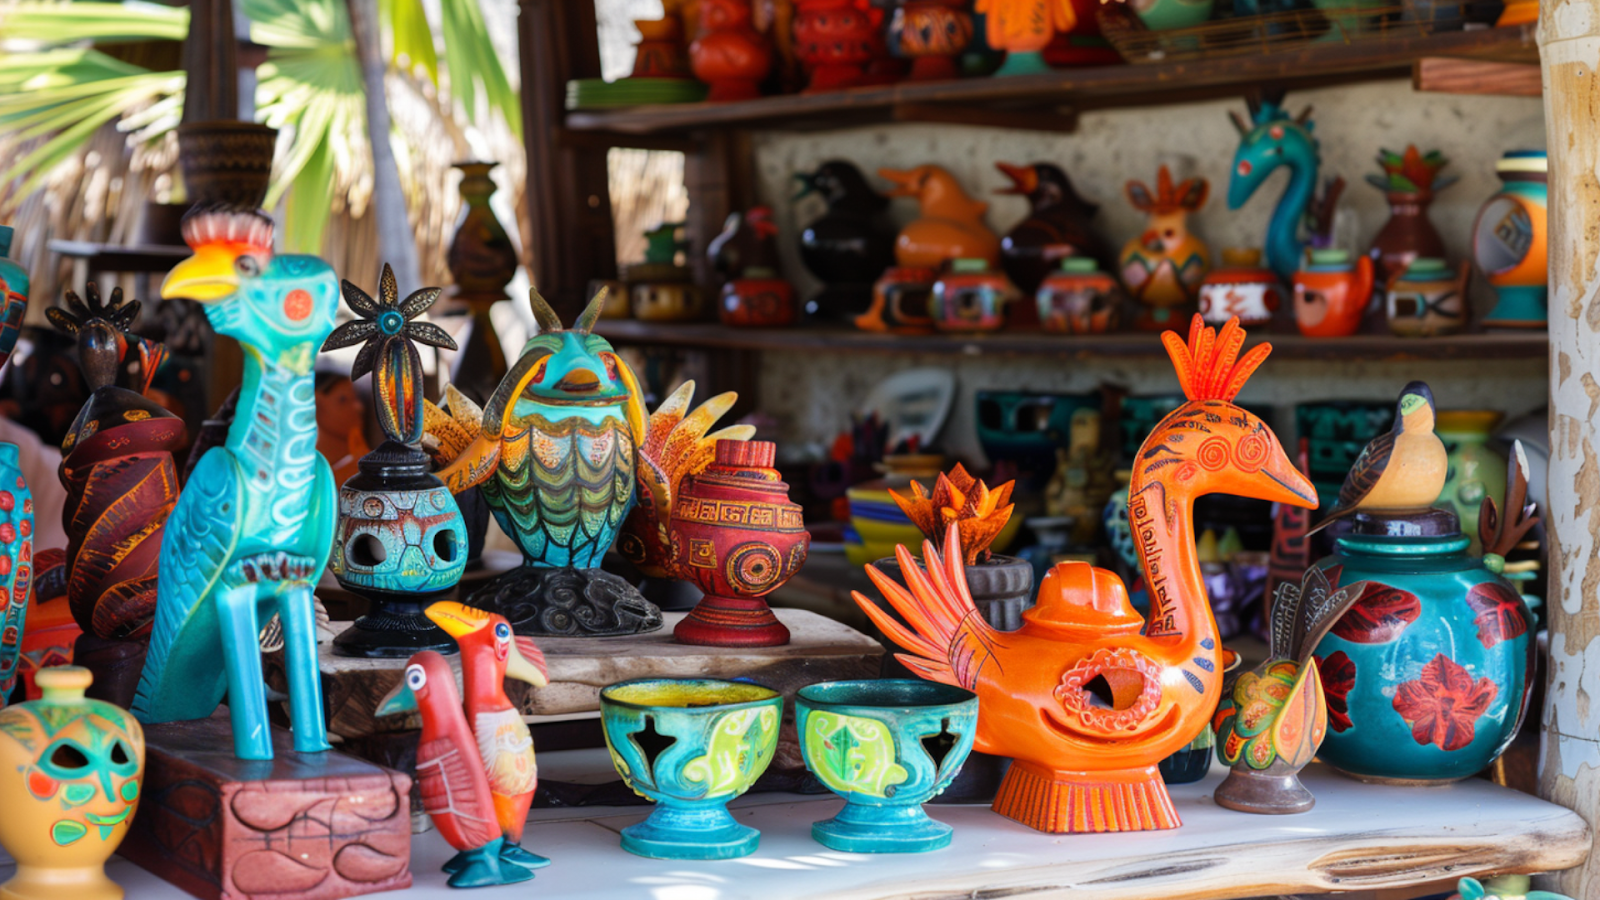 A variety of souvenirs at a local shop in Cancun